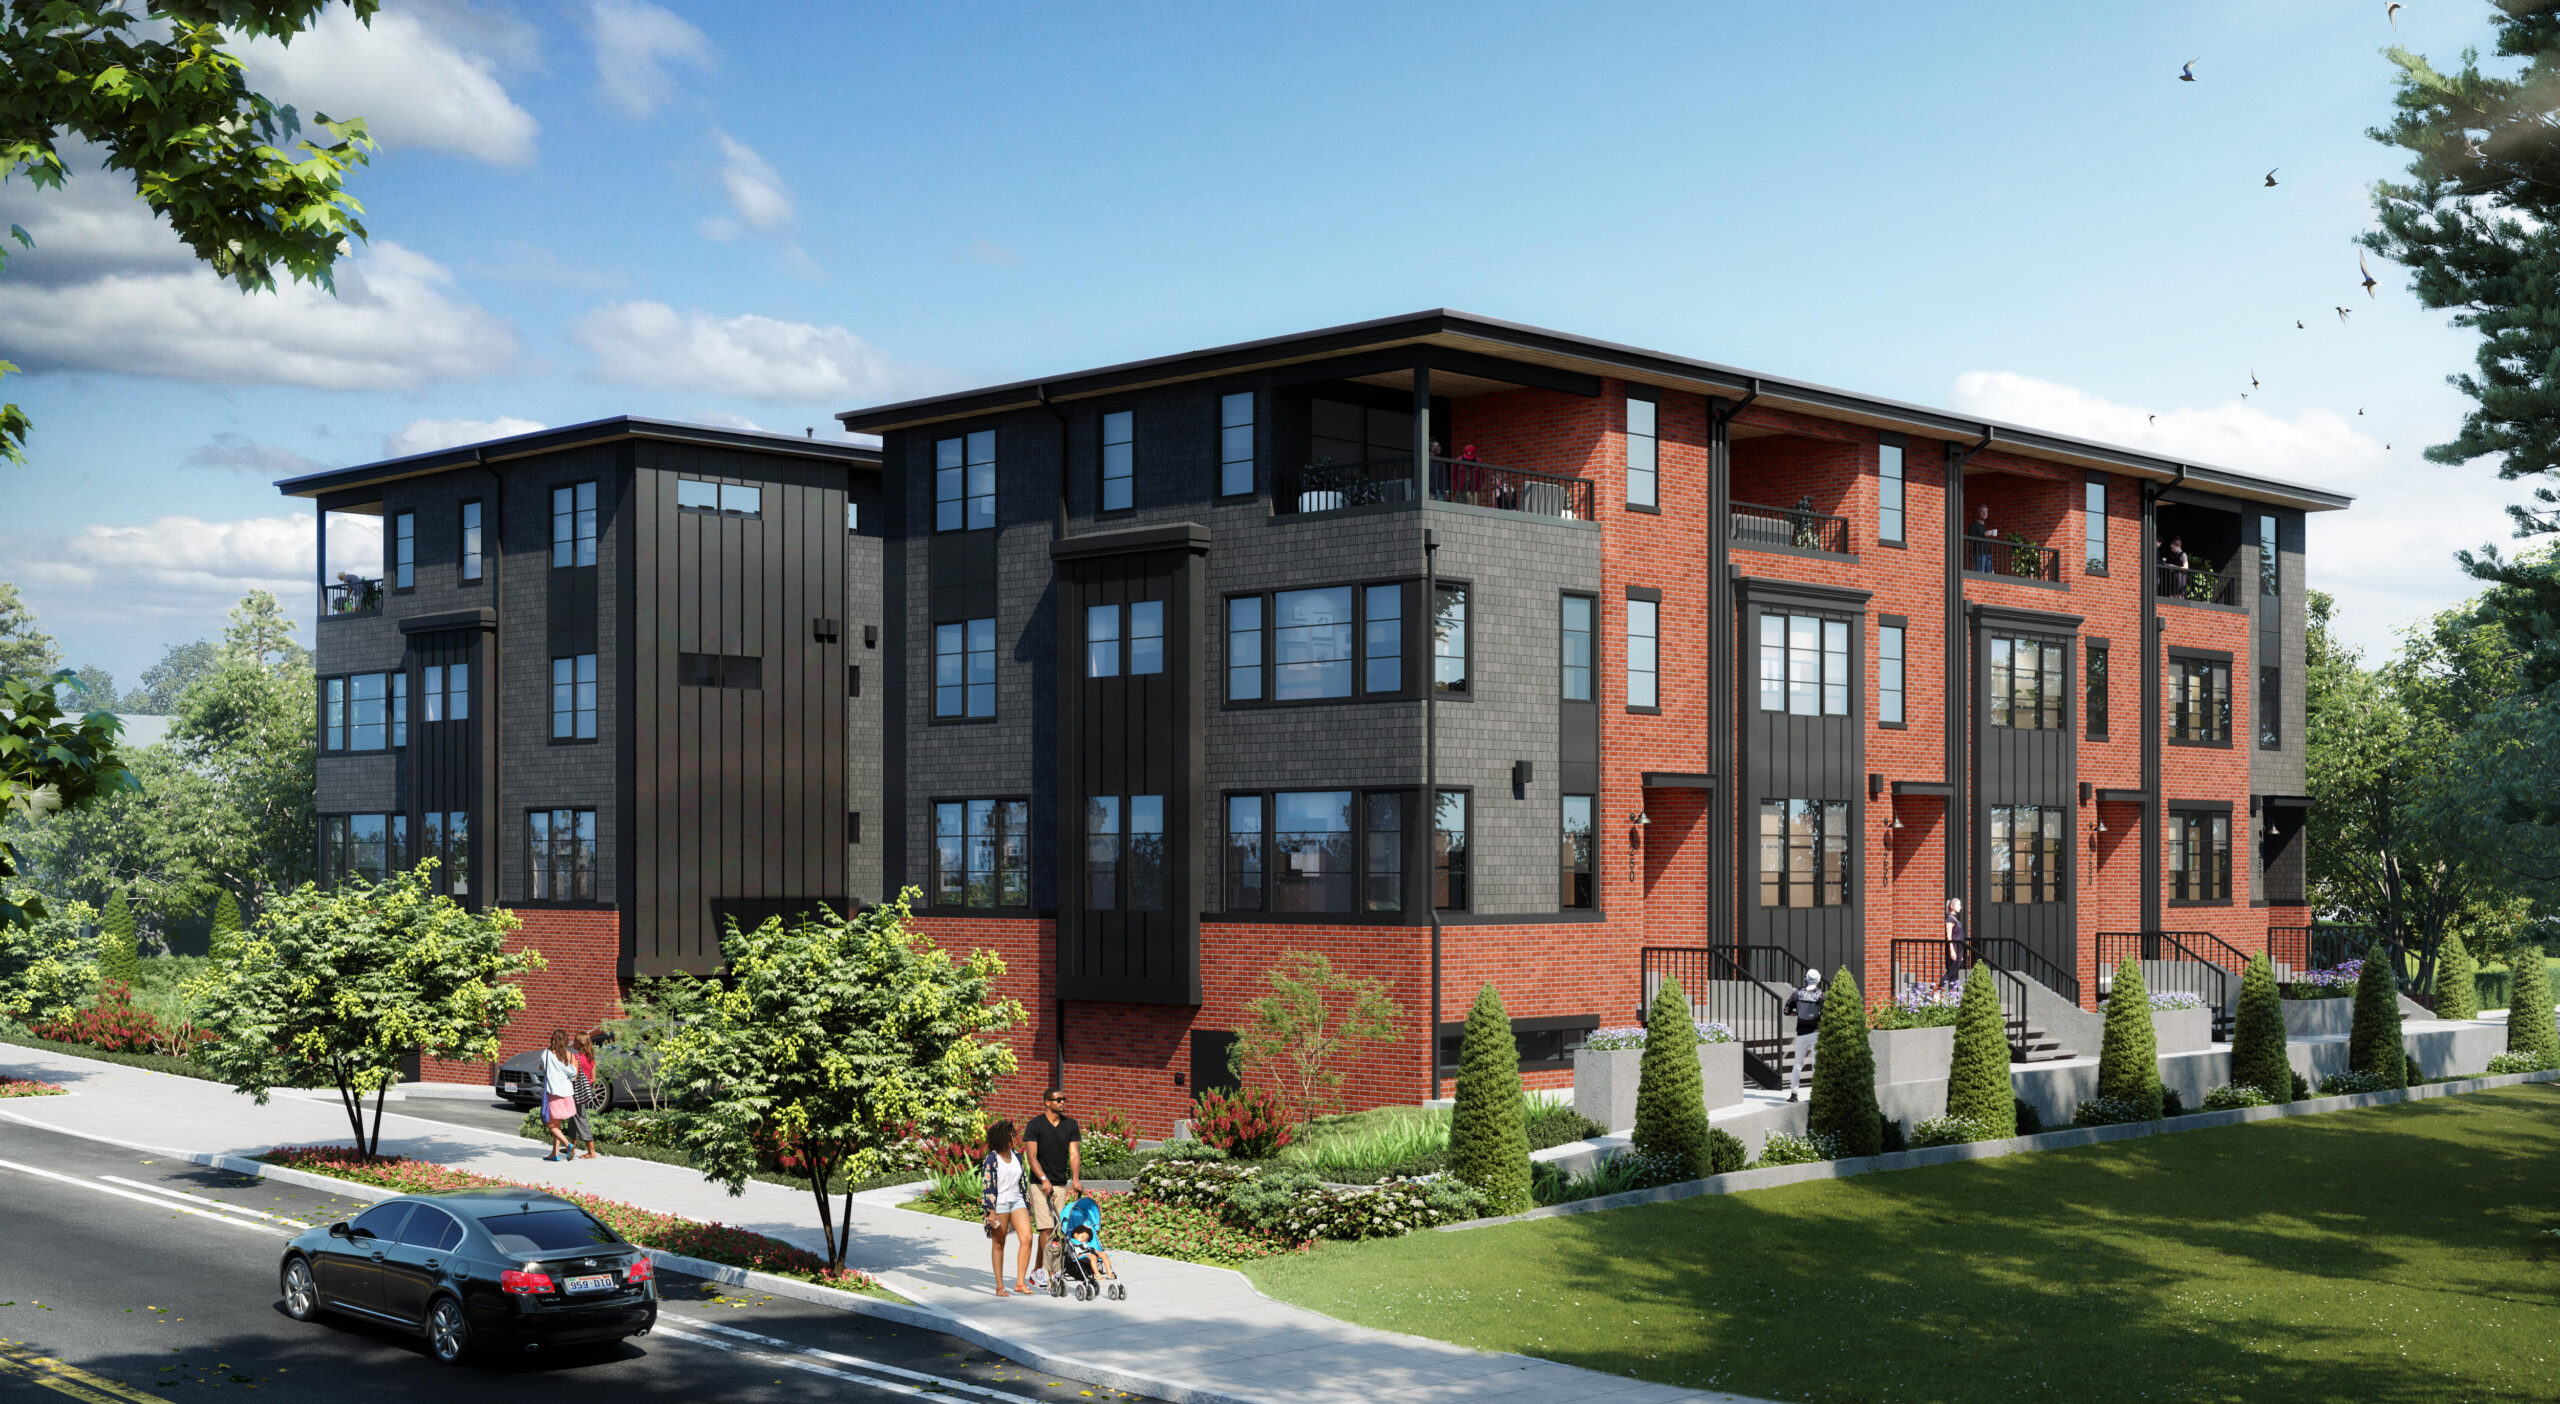 Approval Granted for 8 Single-Family Townhomes on 112th Ave NE ...